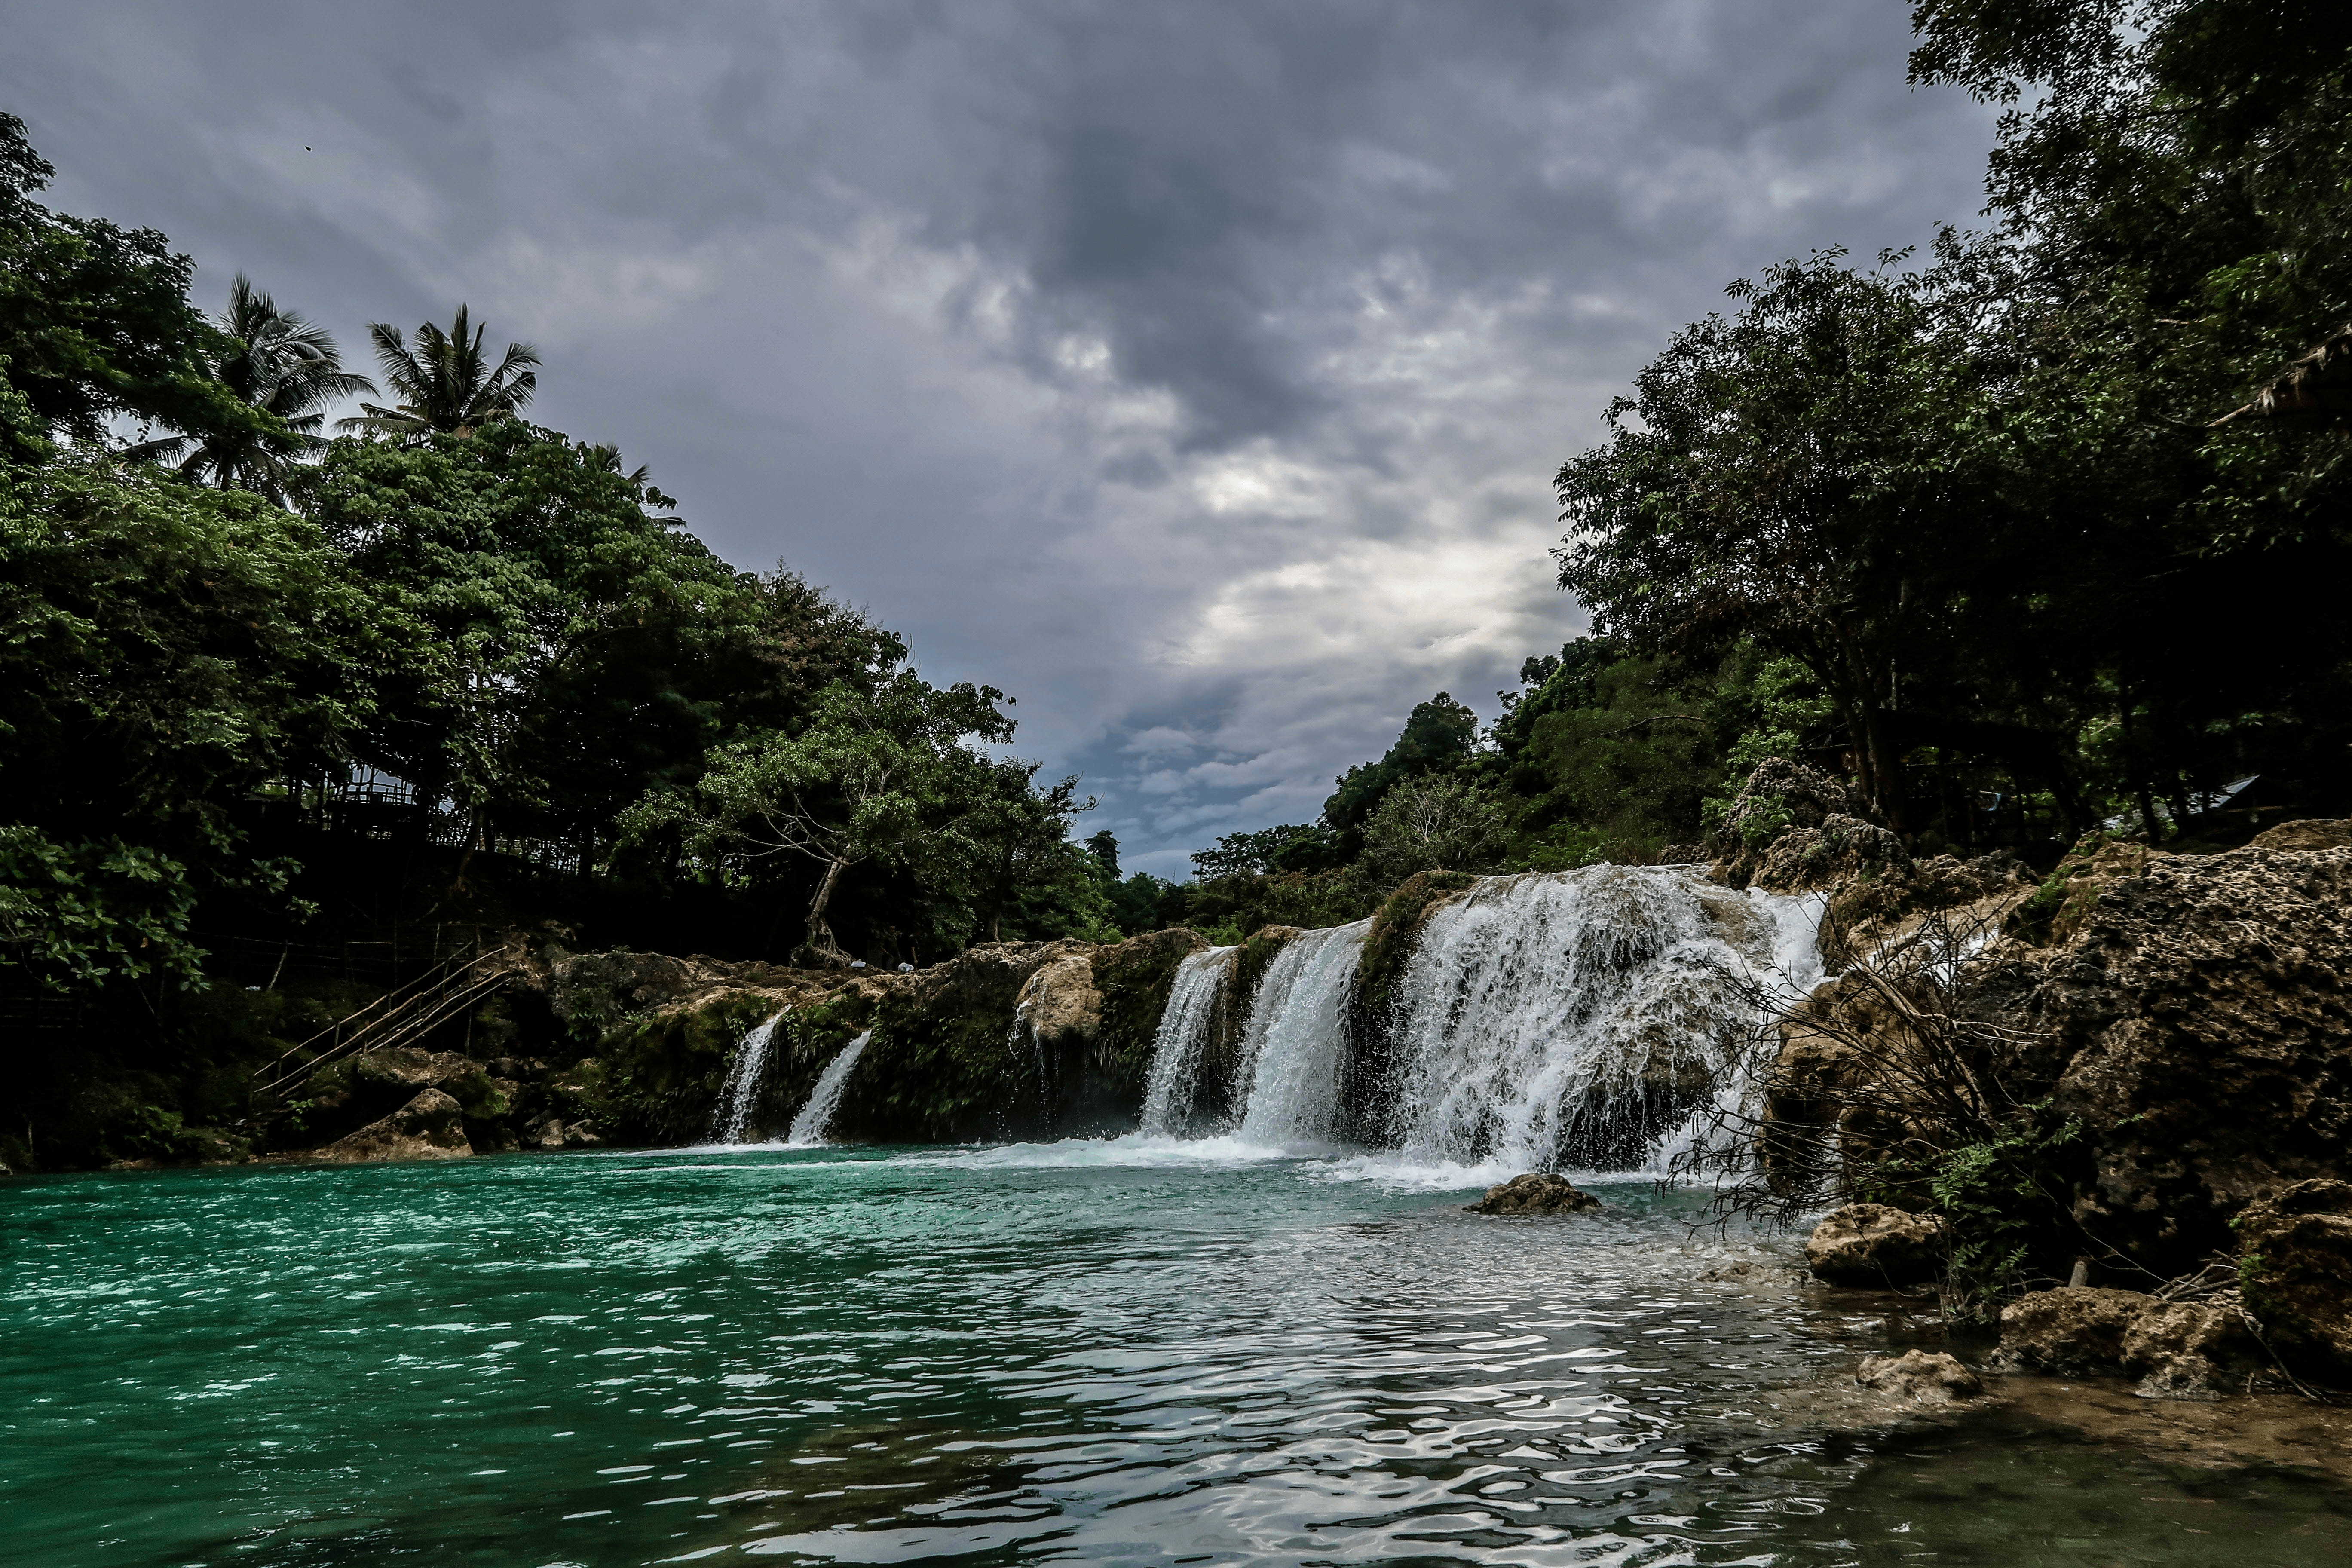 bolinao falls 2 waterfall in pangasinan province philippines